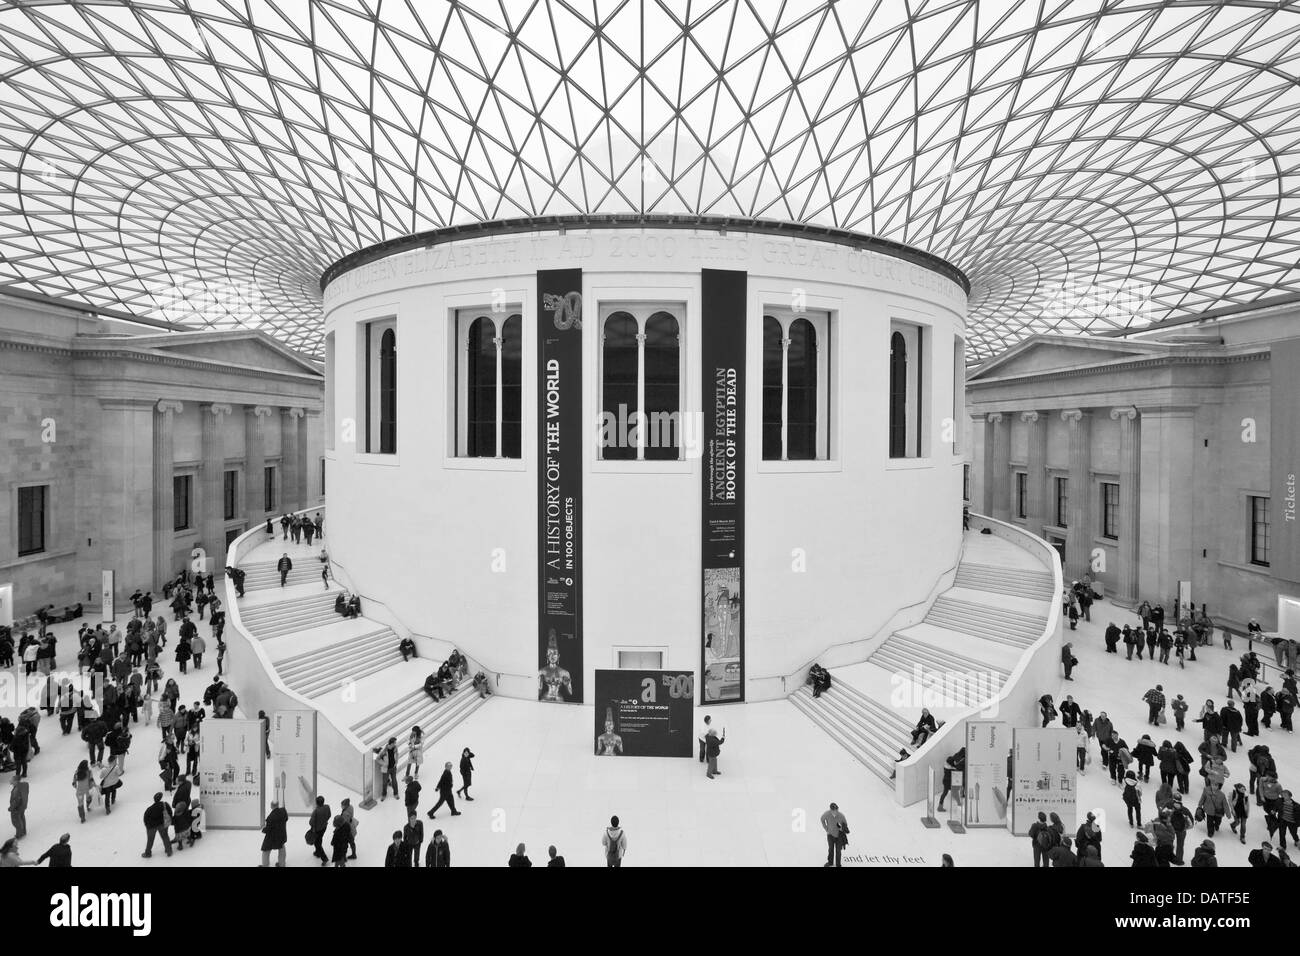 View of interior atrium at the British Museum with its glass domed ceiling. Stock Photo